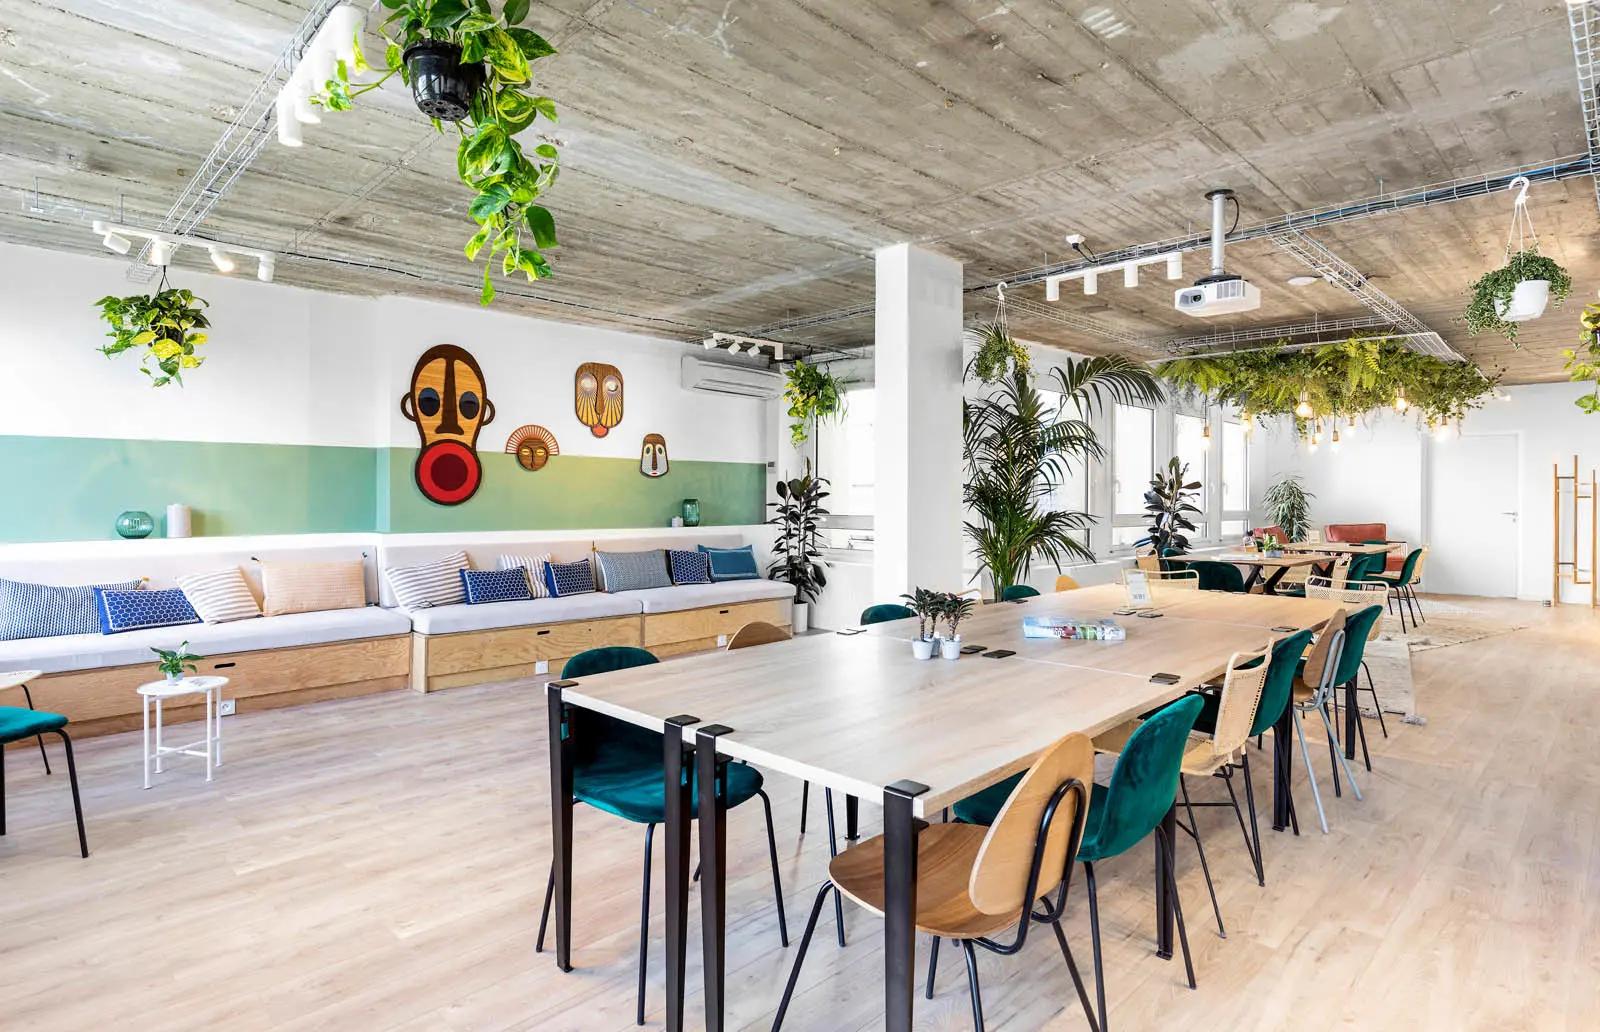 Meeting room in Large, luminous space with plant ceiling - 3